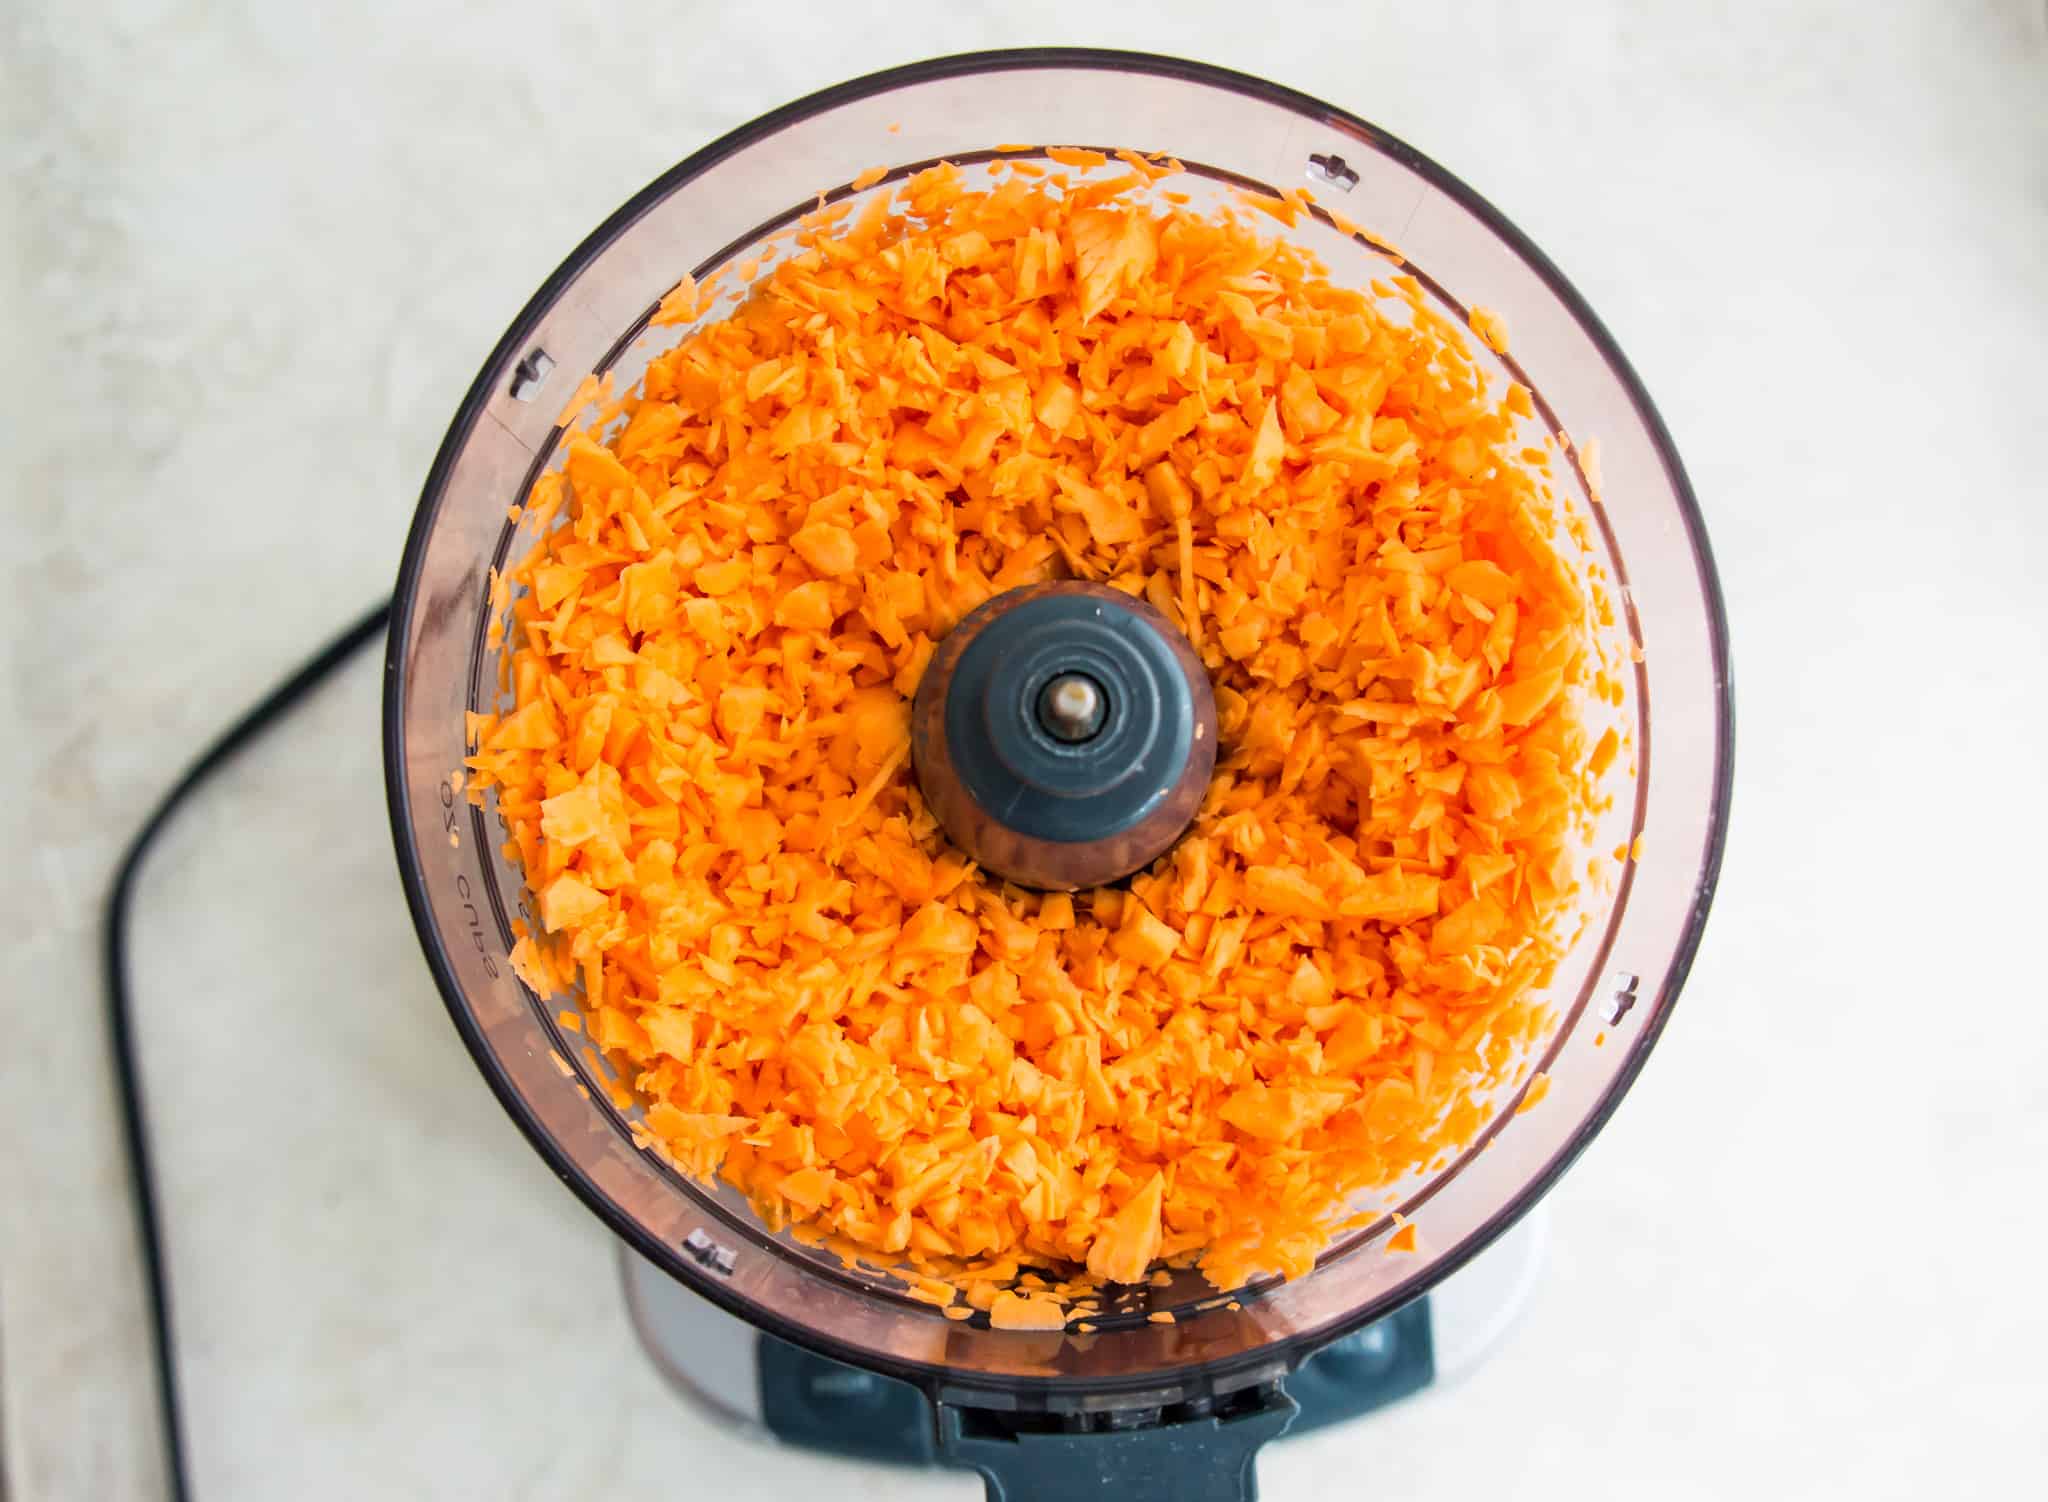 A food processor filled with small pieces of sweet potato.